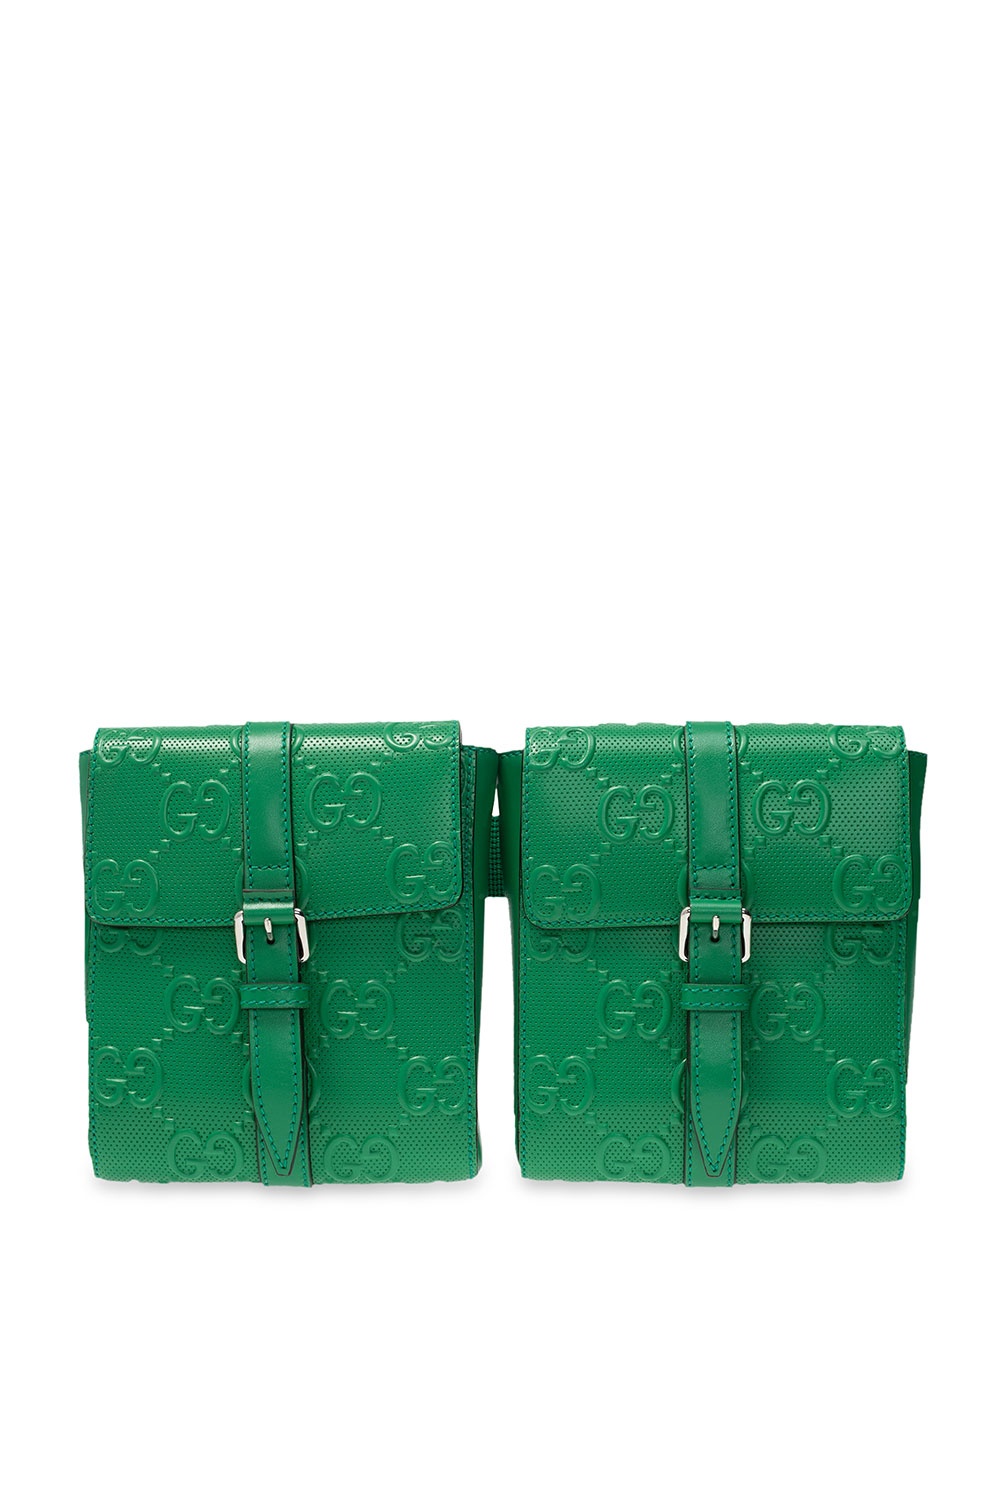 Gucci Leather GG Belt Bag in Green for Men